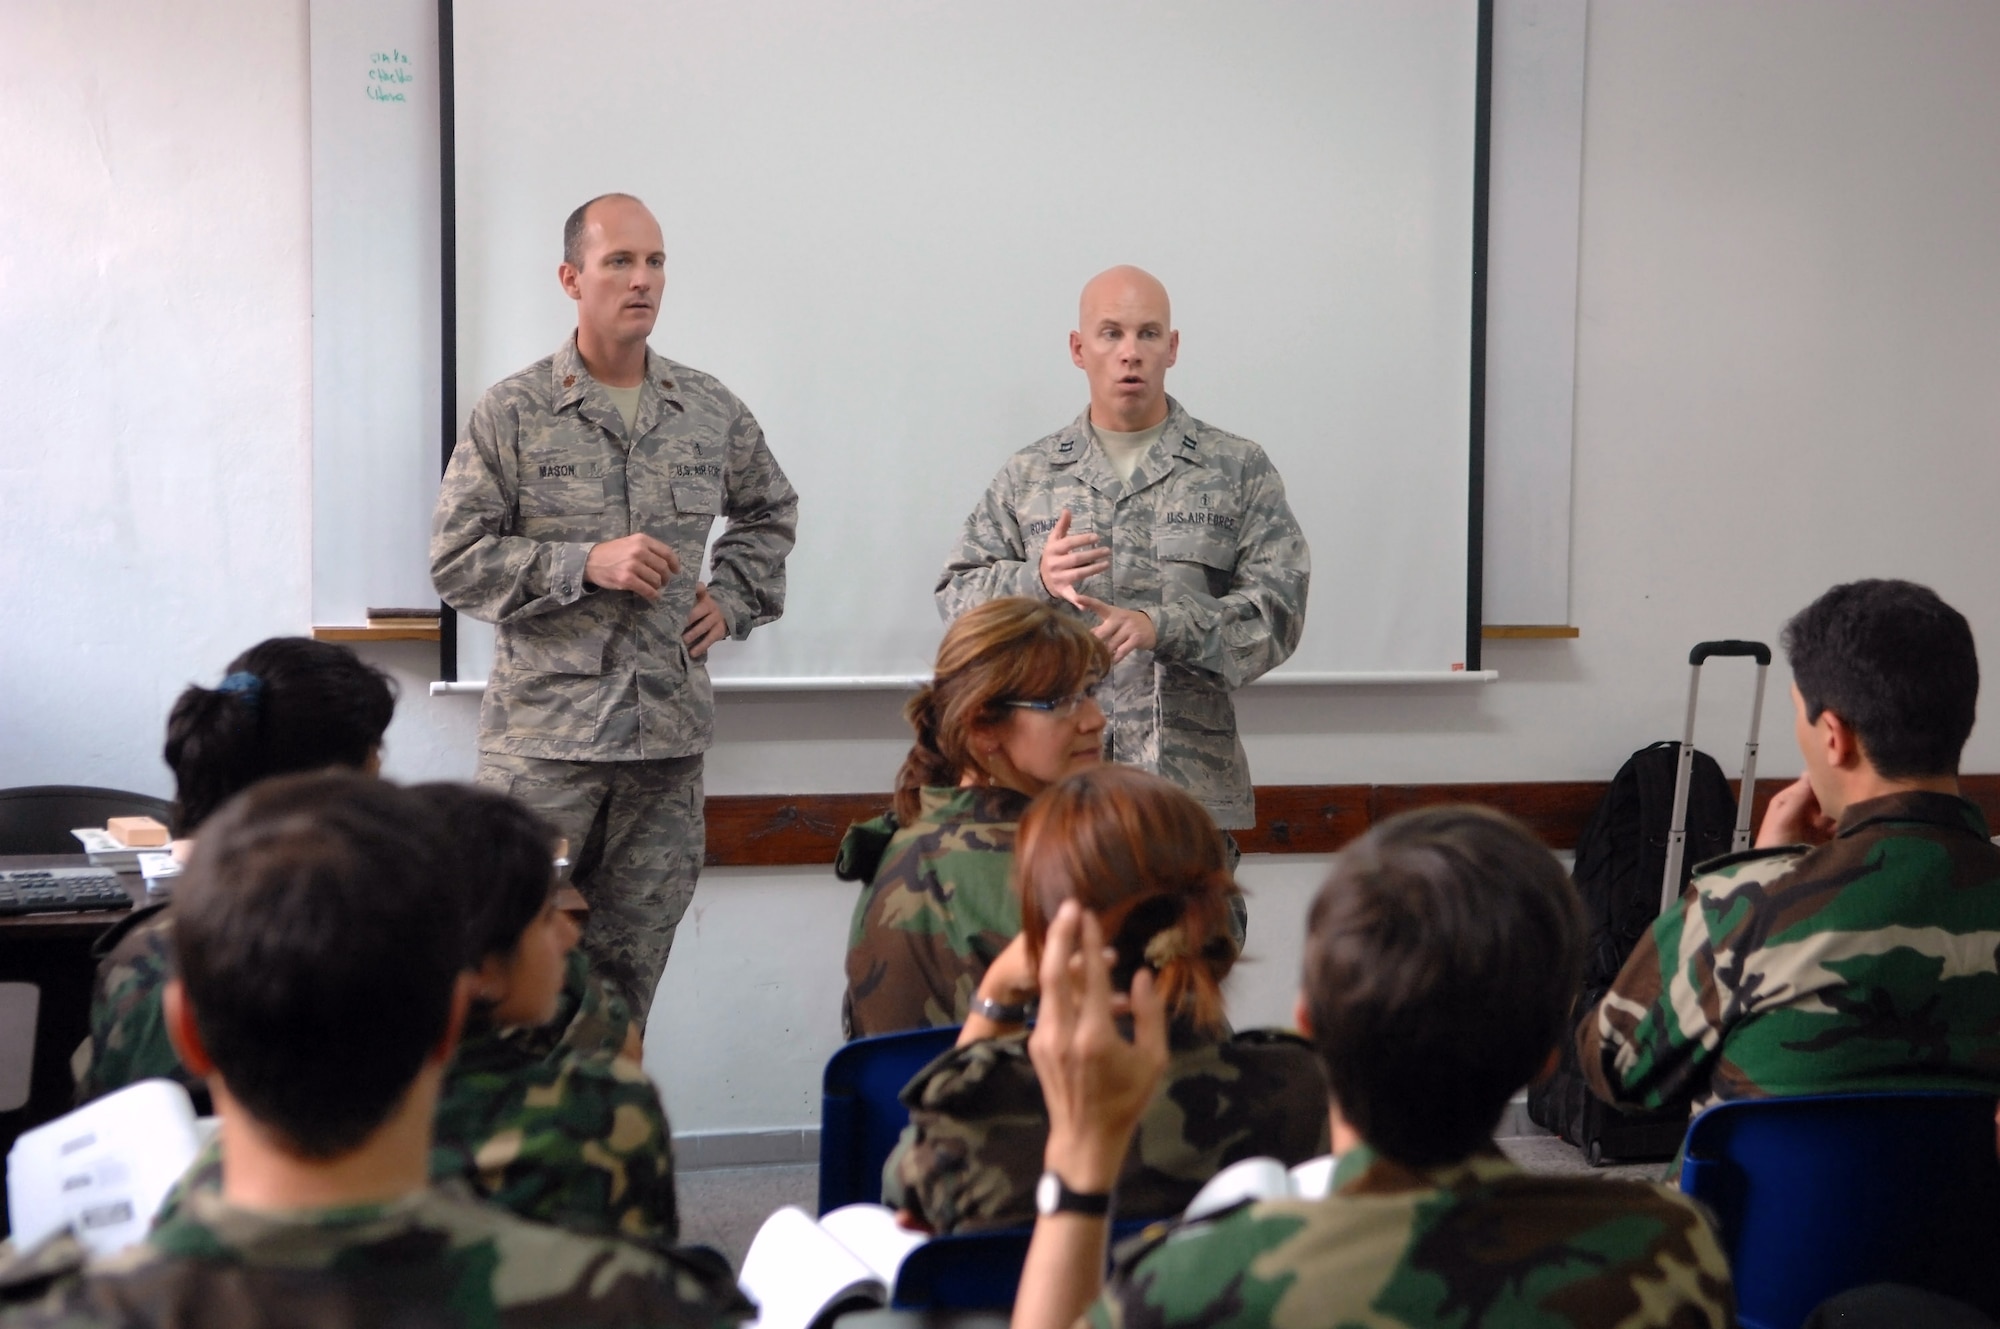 Maj. Phillip Mason (left) and Capt. Timothy Bonjour answer questions from Uruguayan military medical counterparts on Nov. 3 in Uruguay. They are part of a Defense Institute for Medical Operation disaster response and medical technique exchange. Major Mason is from Wright-Patterson Air Force Base, Ohio, and Captain Bonjour is from Travis AFB, Calif. (U.S. Air Force photo/Tech. Sgt. Roy Santana)